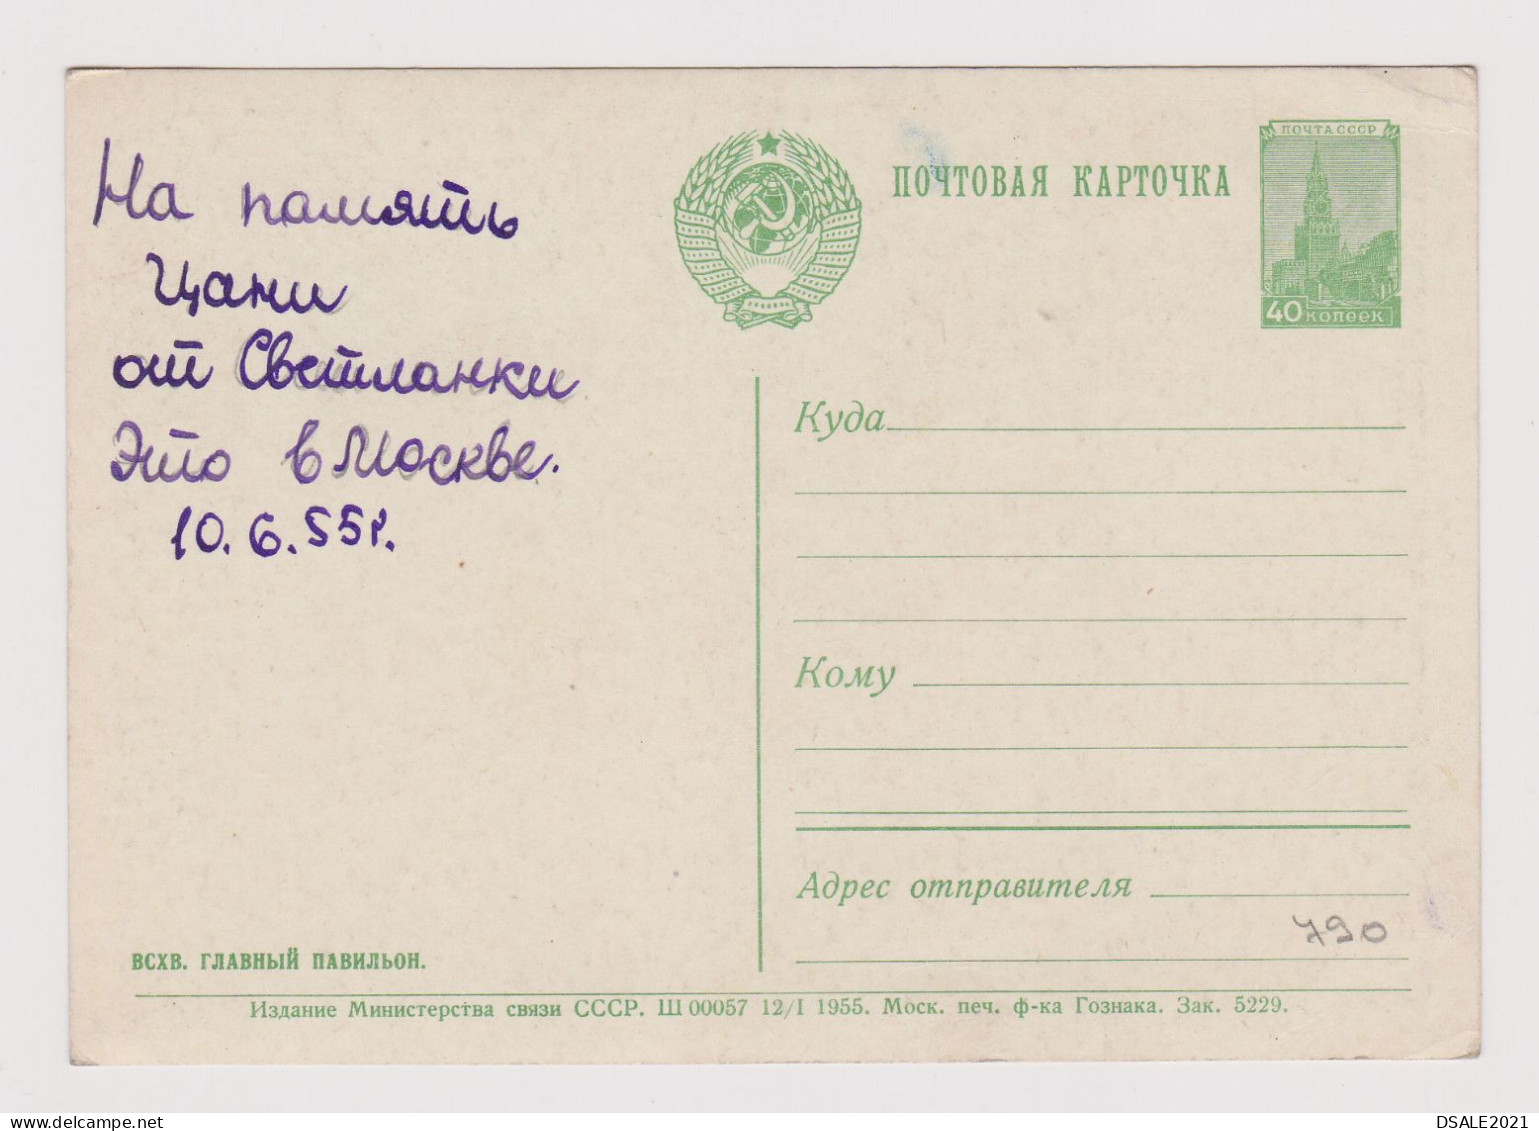 Russia USSR Soviet Union Russland, 1950s Postal Stationery Card, Entier, Ganzachen, MOSCOW View VDNH Exhibition (790) - 1950-59